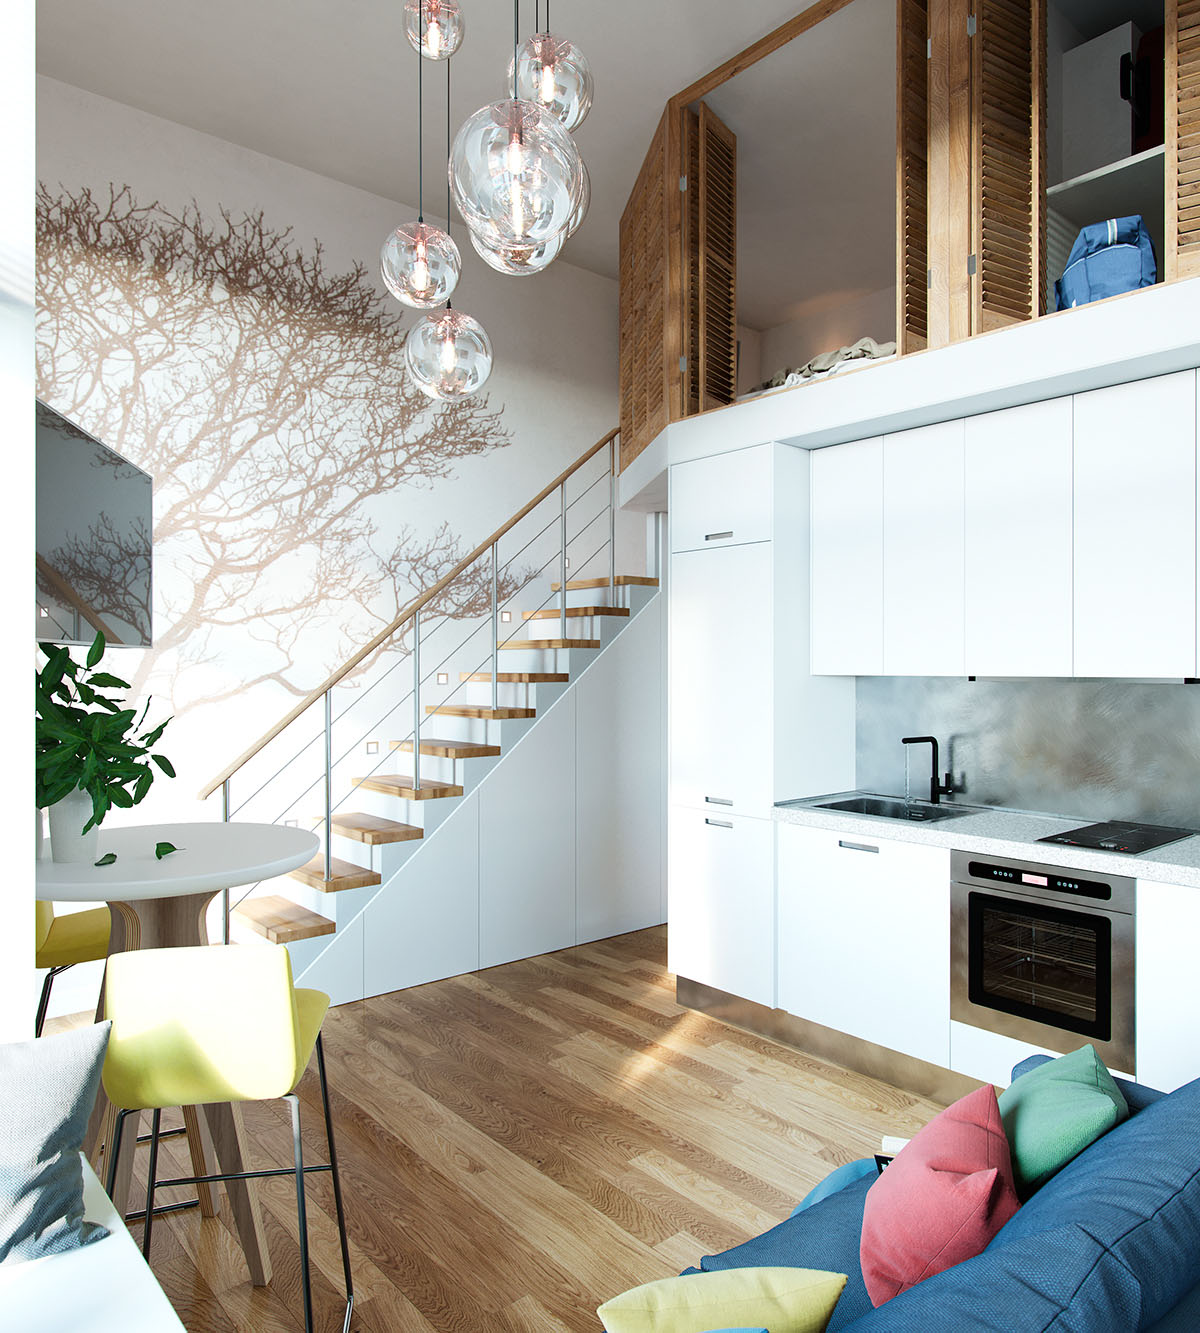 Small Studio Apartment In Moscow With Loft Bedroom | iDesignArch ...